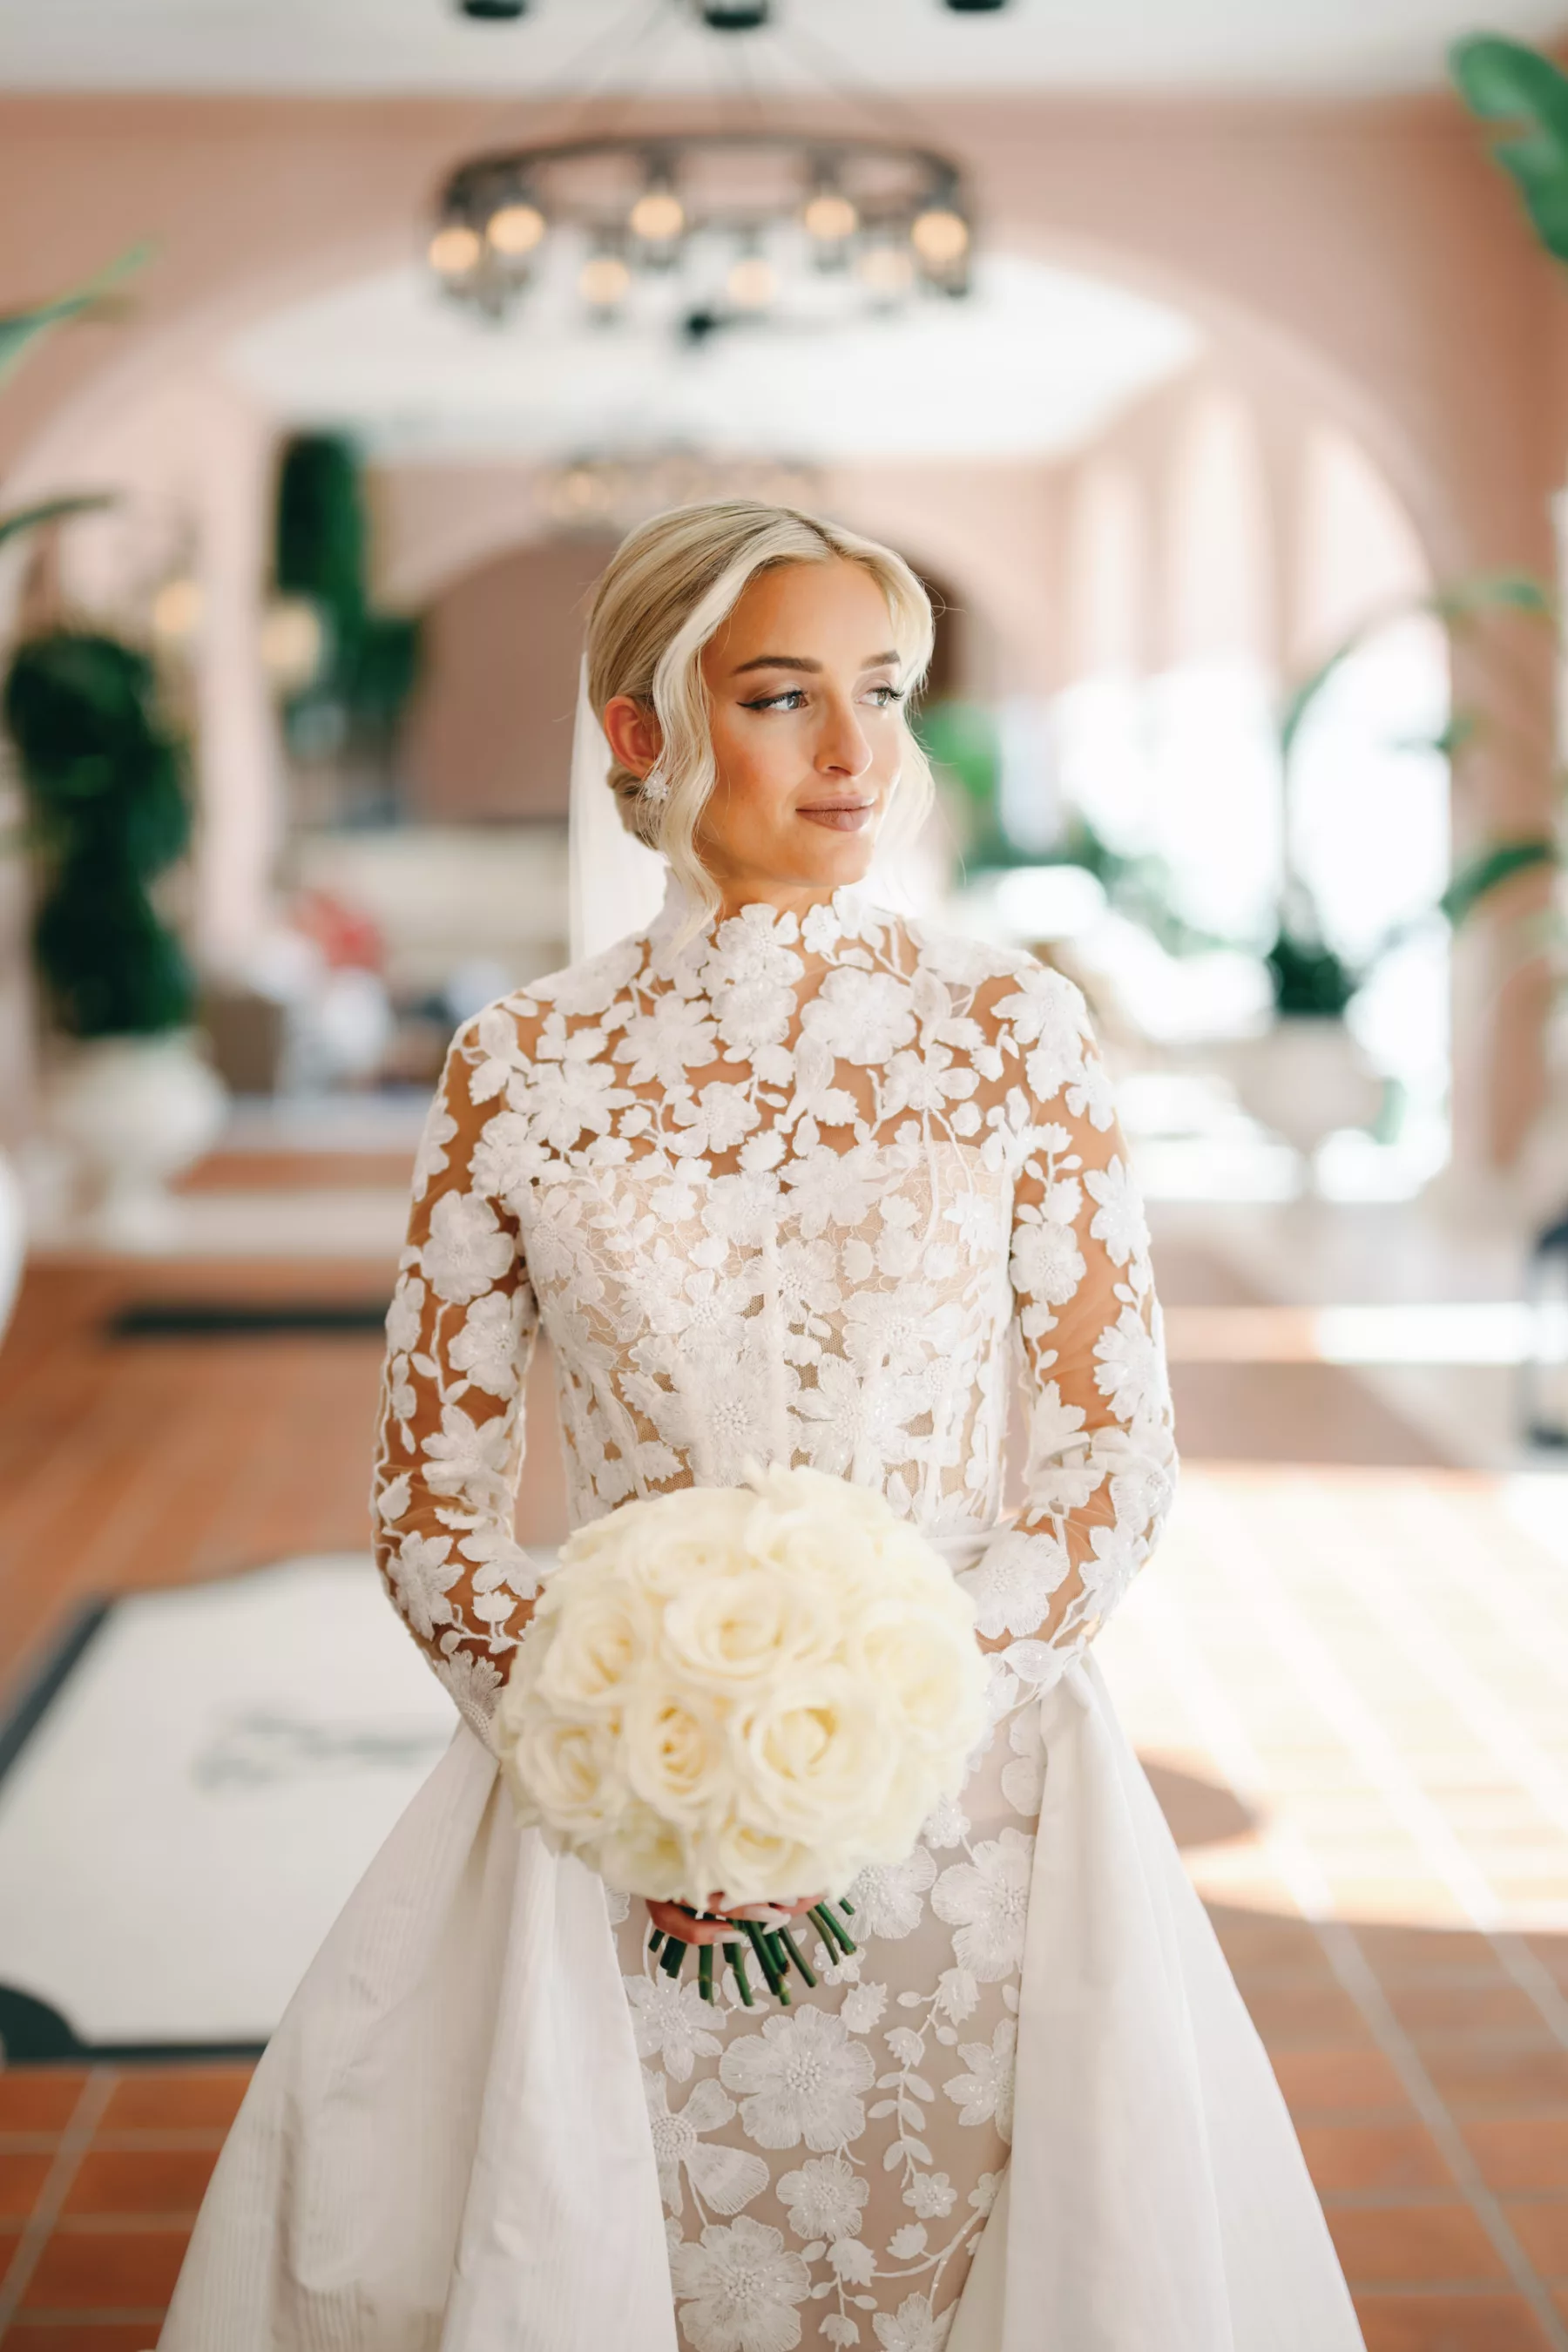 Long Sleeve Embroidered Flower Fit and Flare Anne Barge Solana Wedding Dress with Detachable Train Inspiration | White Rose Bridal Bouquet Ideas